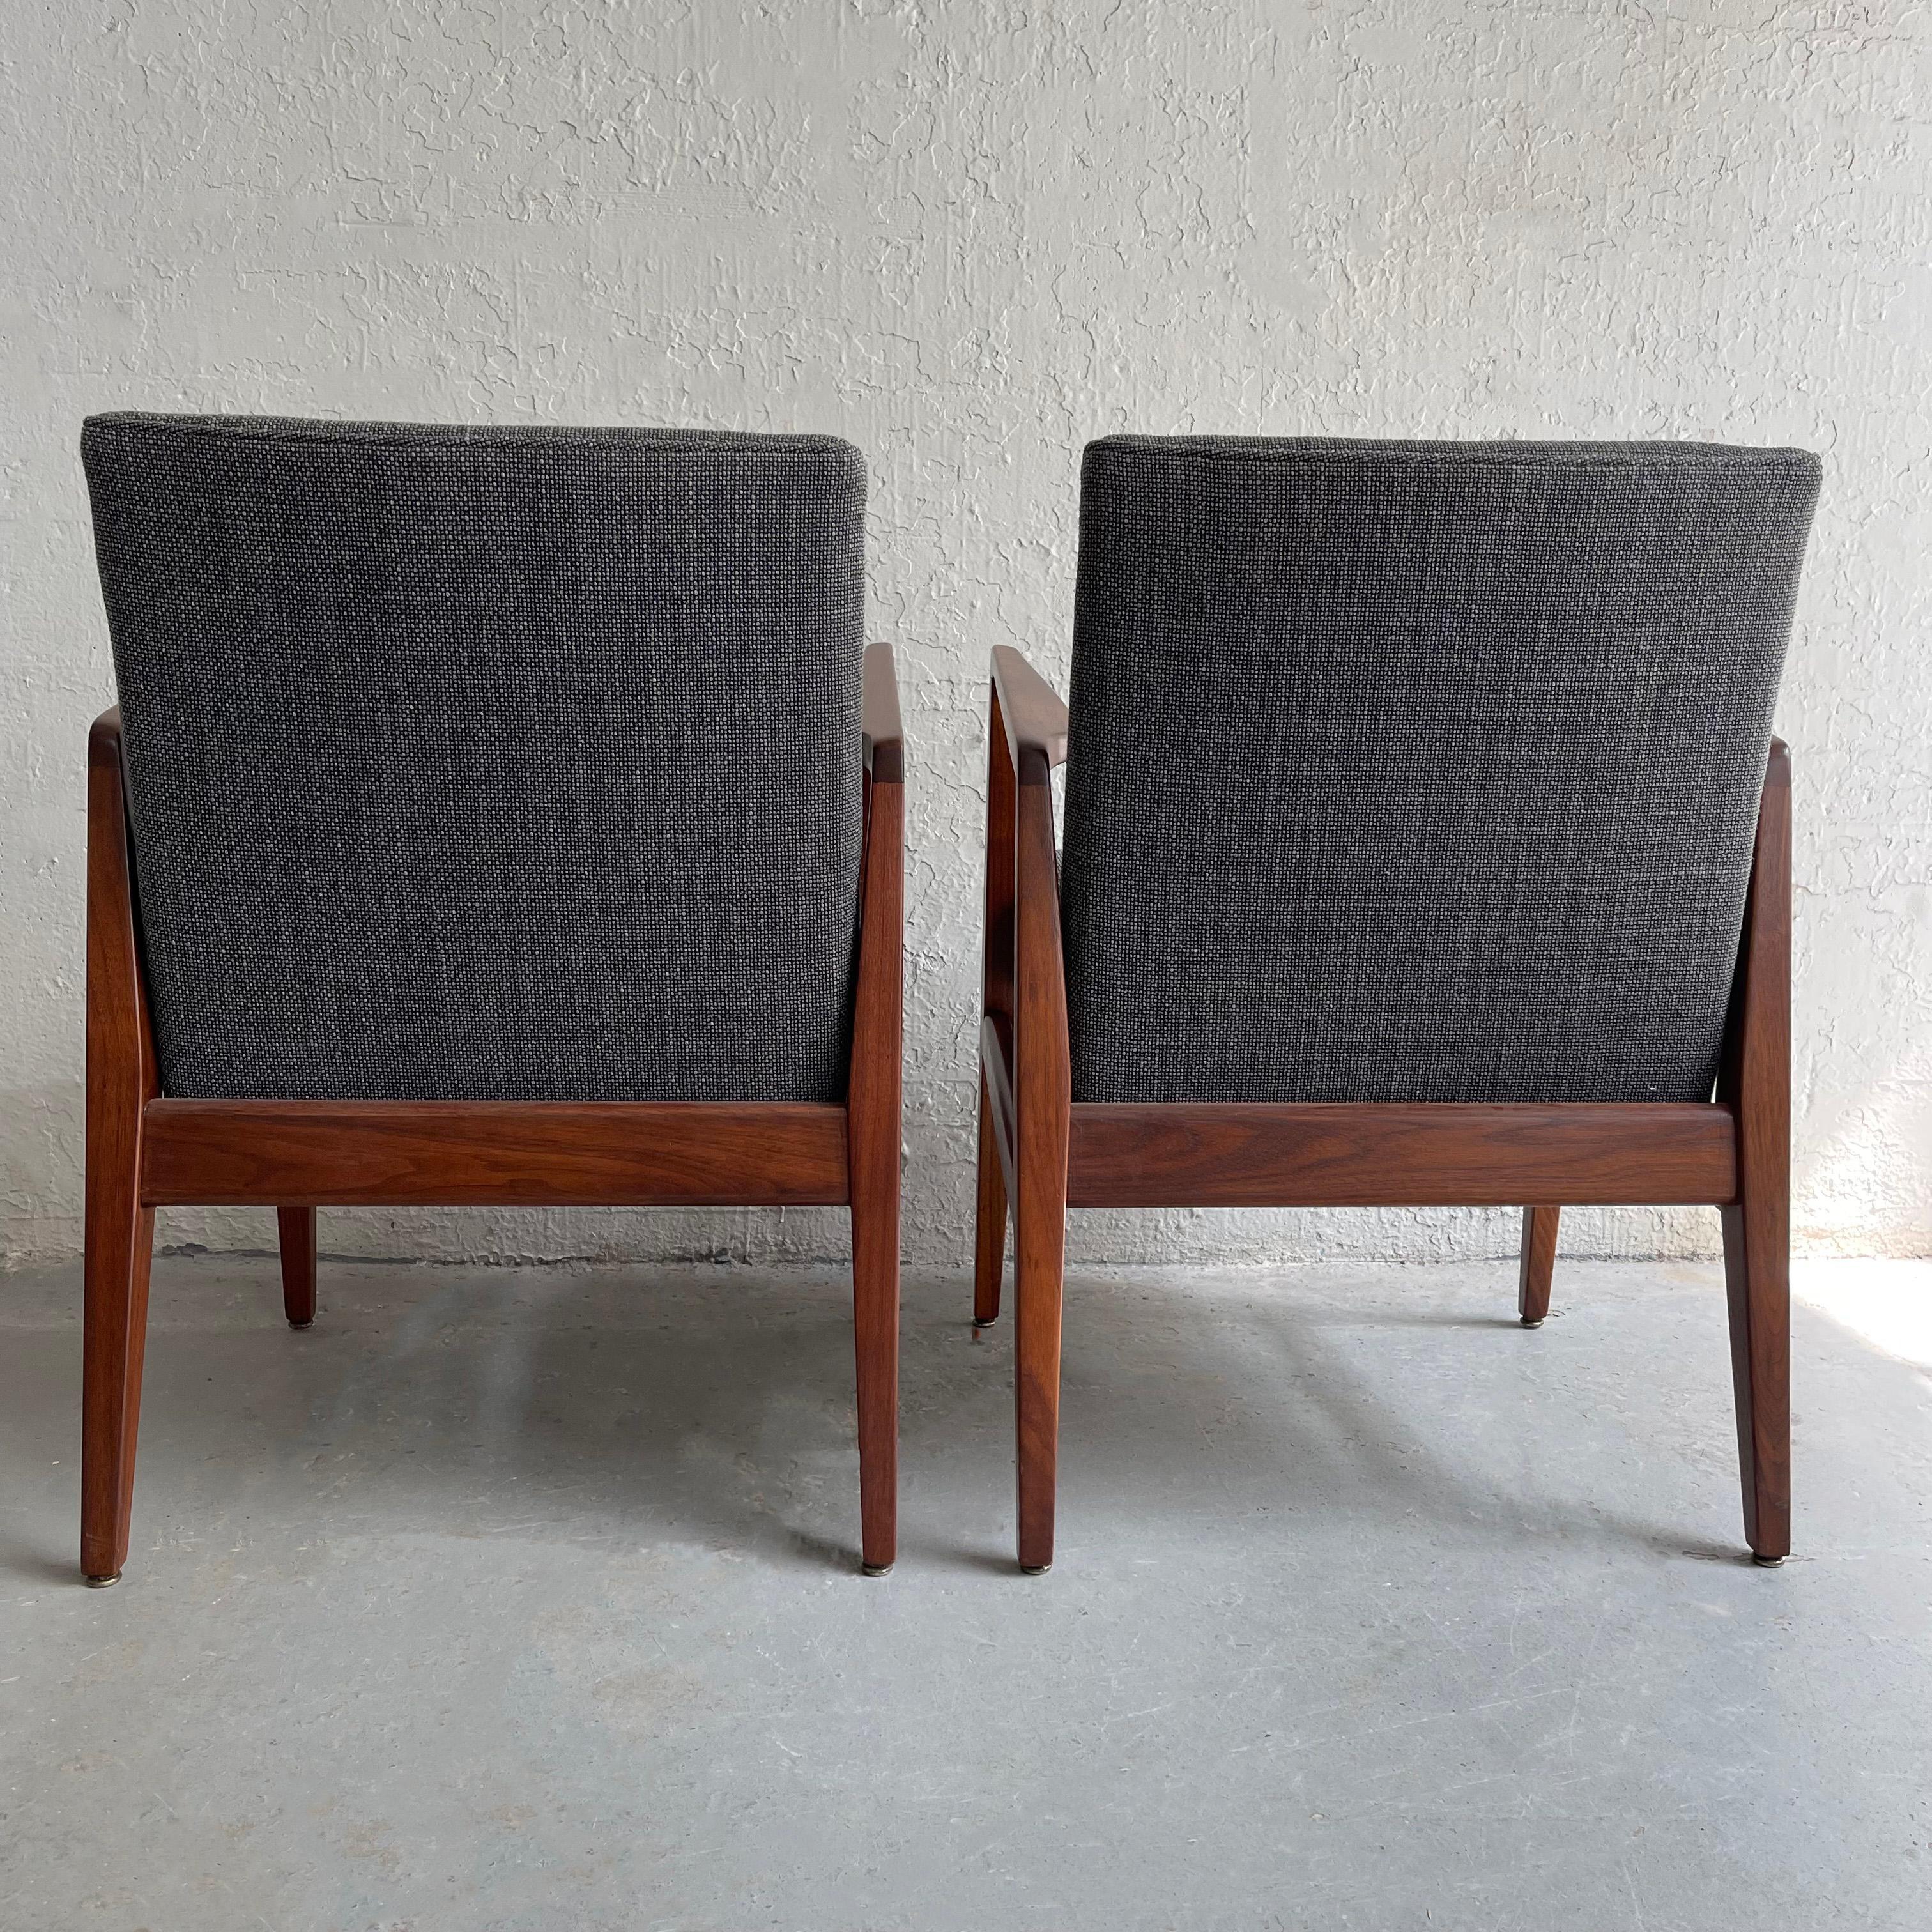 Pair Mid-Century Modern Walnut Armchairs by Jens Risom For Sale 1